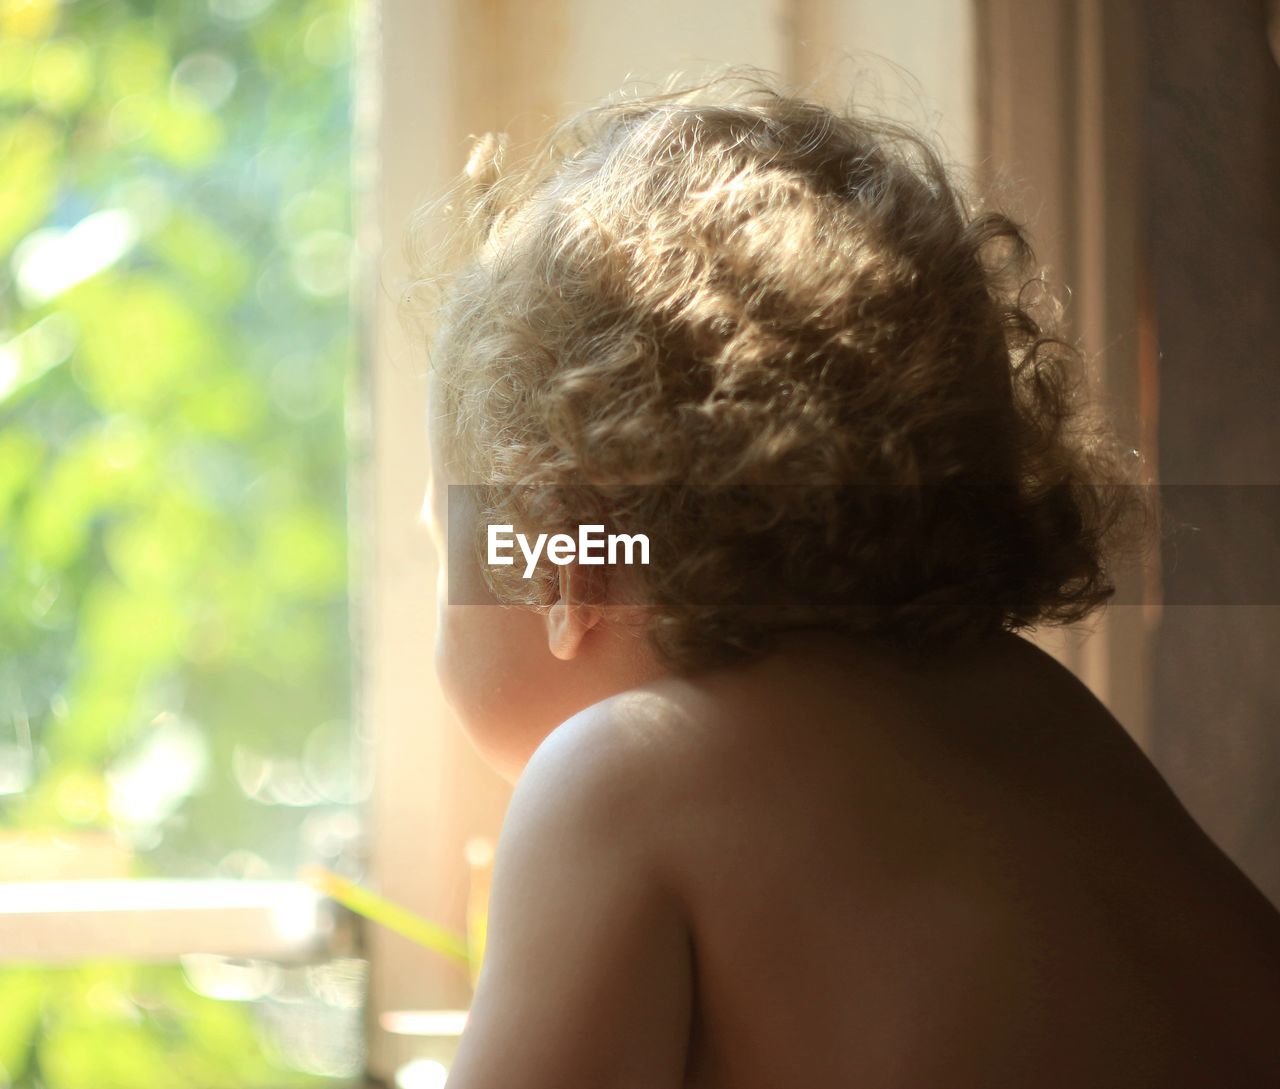 Rear view of shirtless baby looking through window